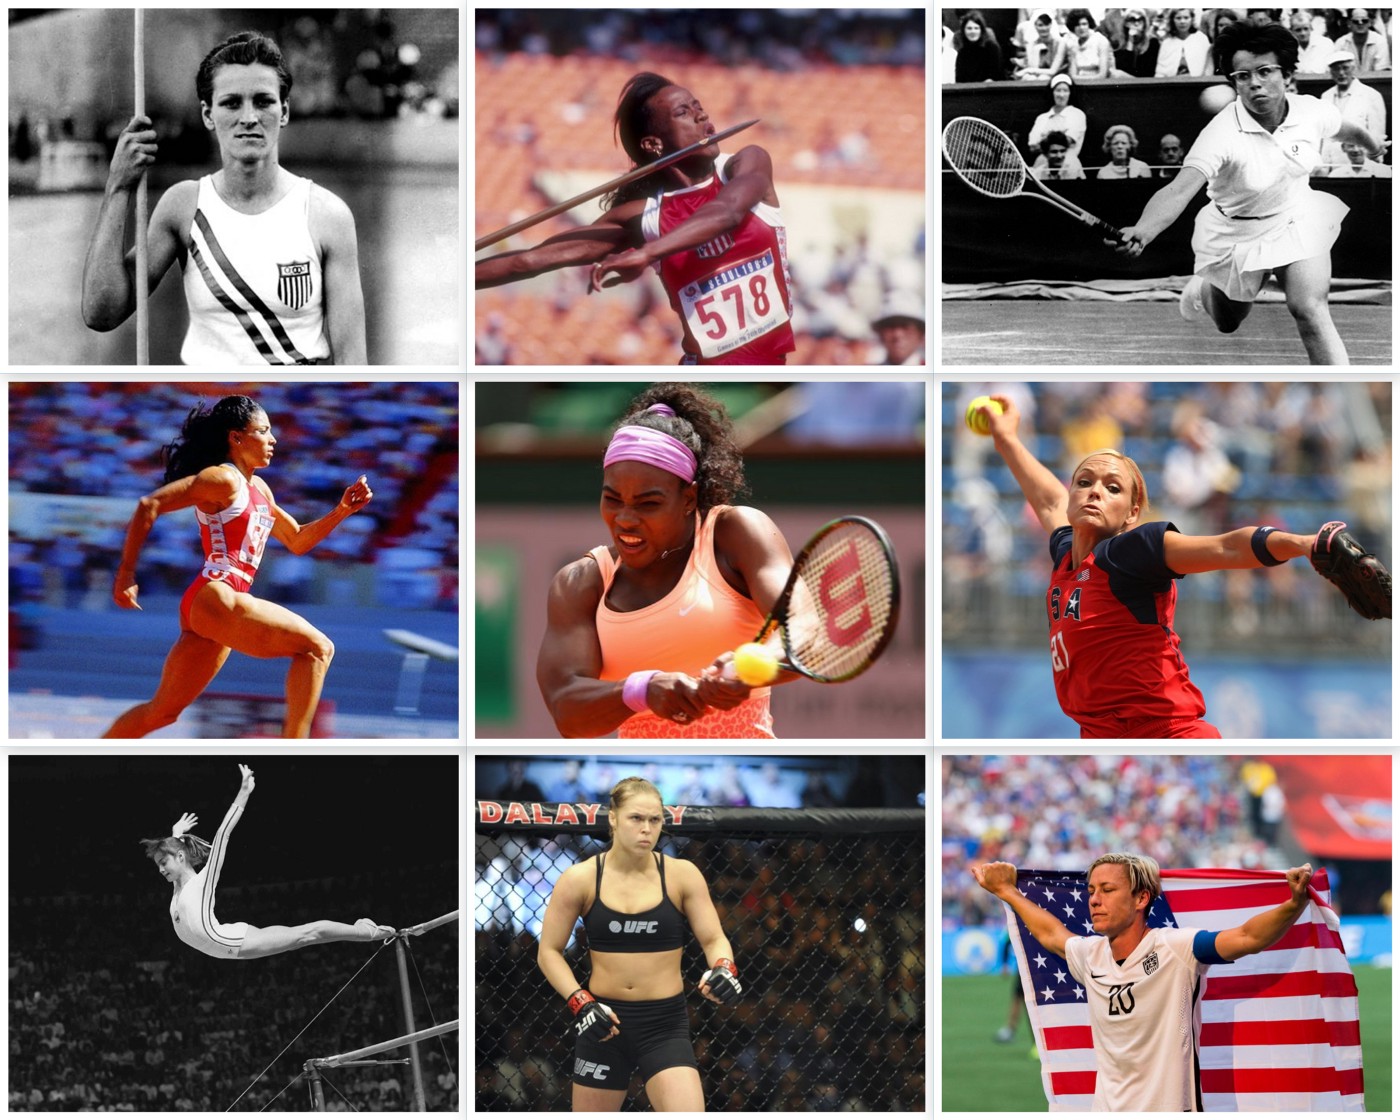 Nine women playing sports such as boxing, tennis and running 